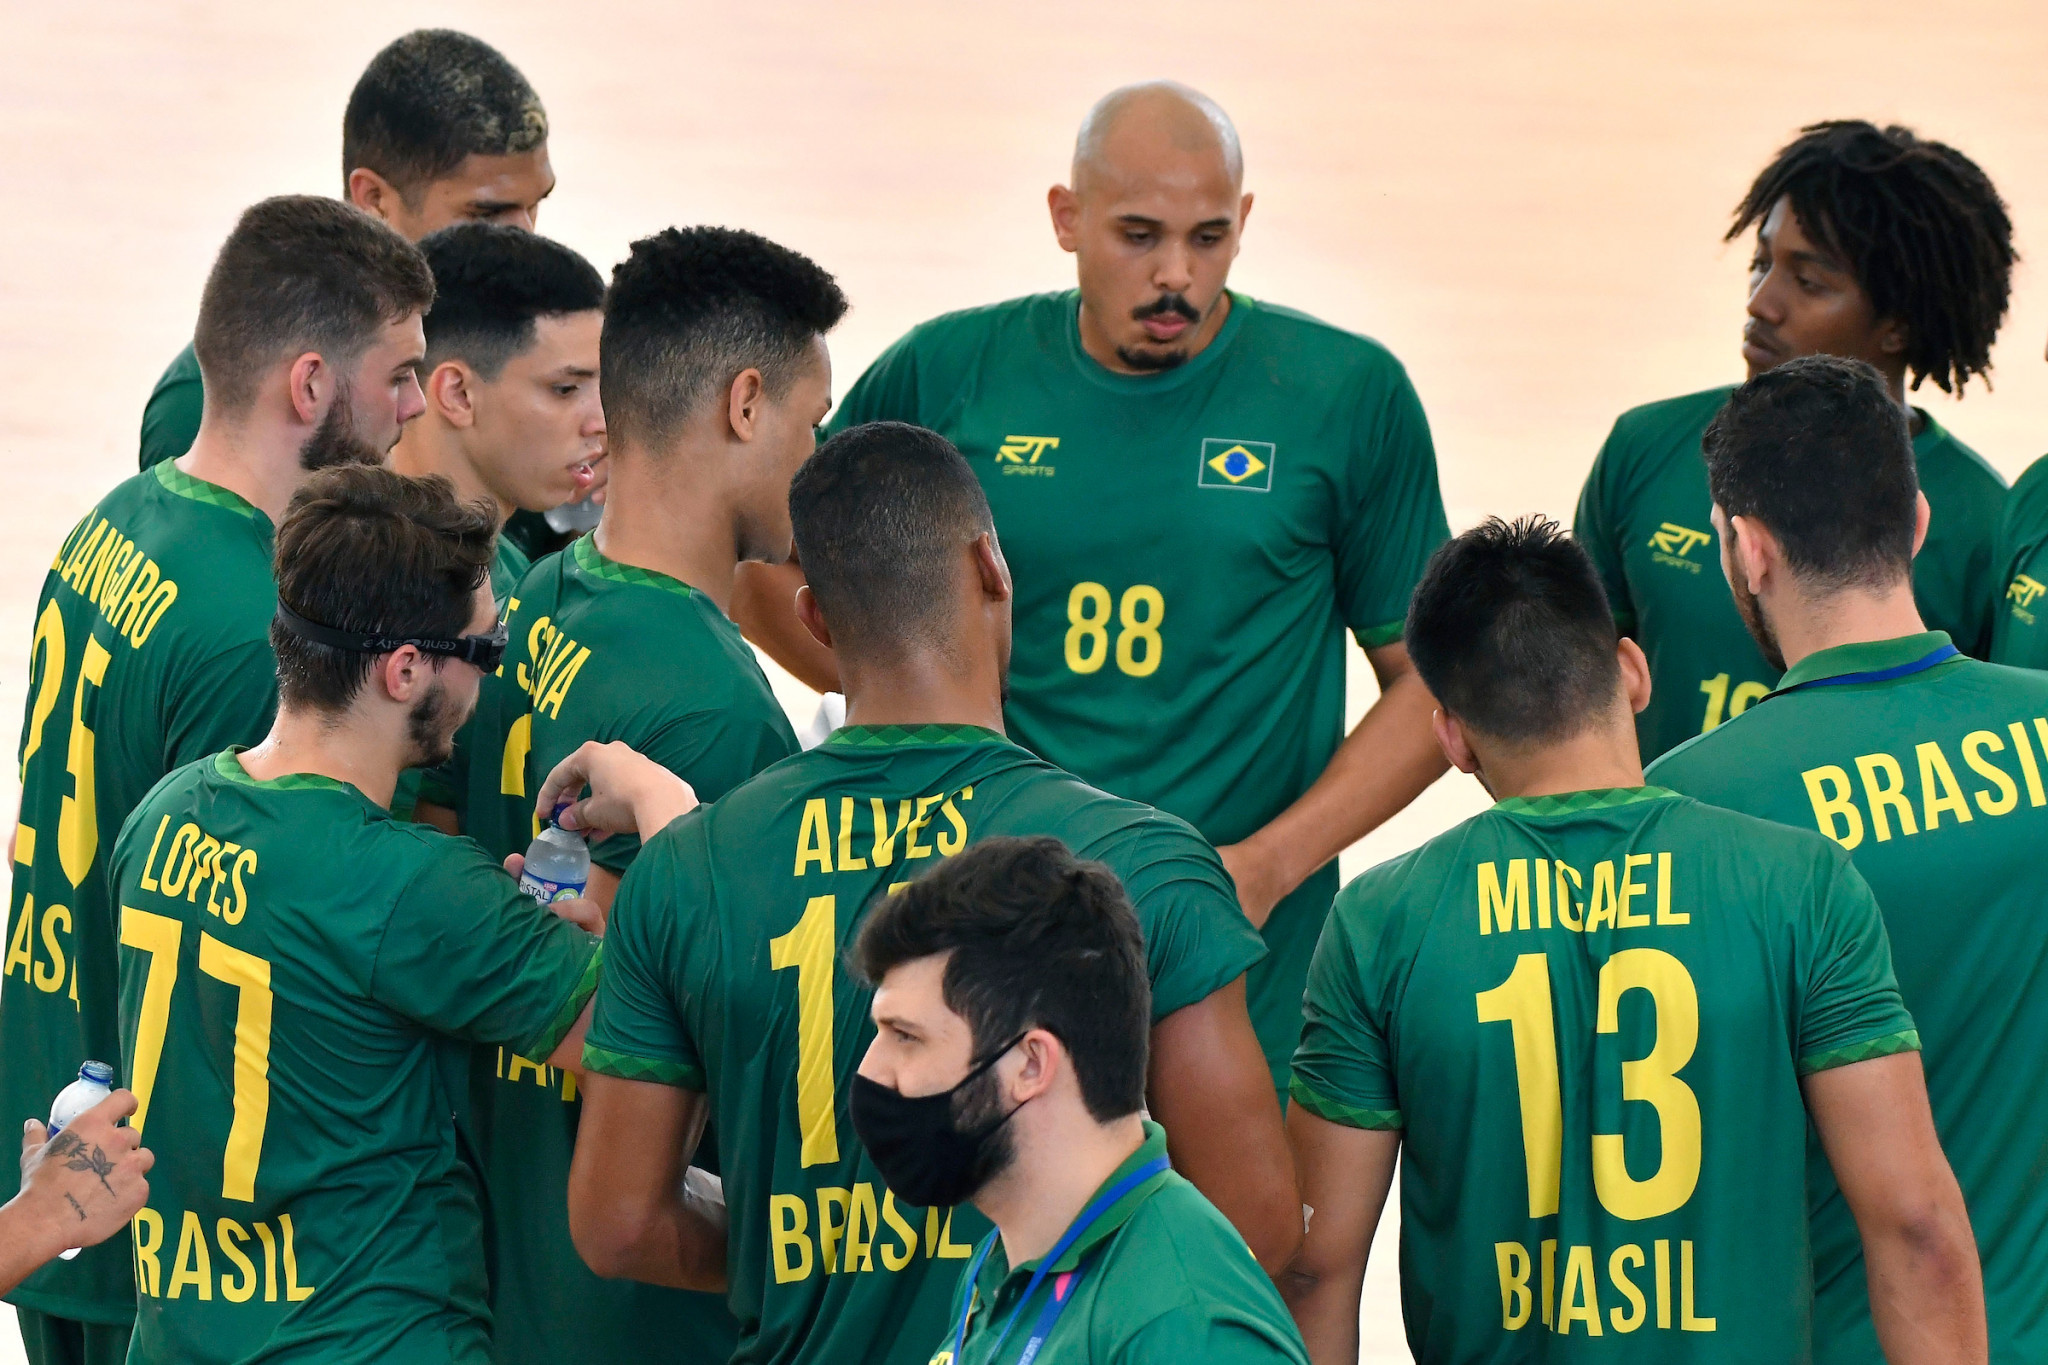 Brazil remained undefeated in the men's handball tournament with a 30-23 win over Chile ©Agencia.Xpress Media